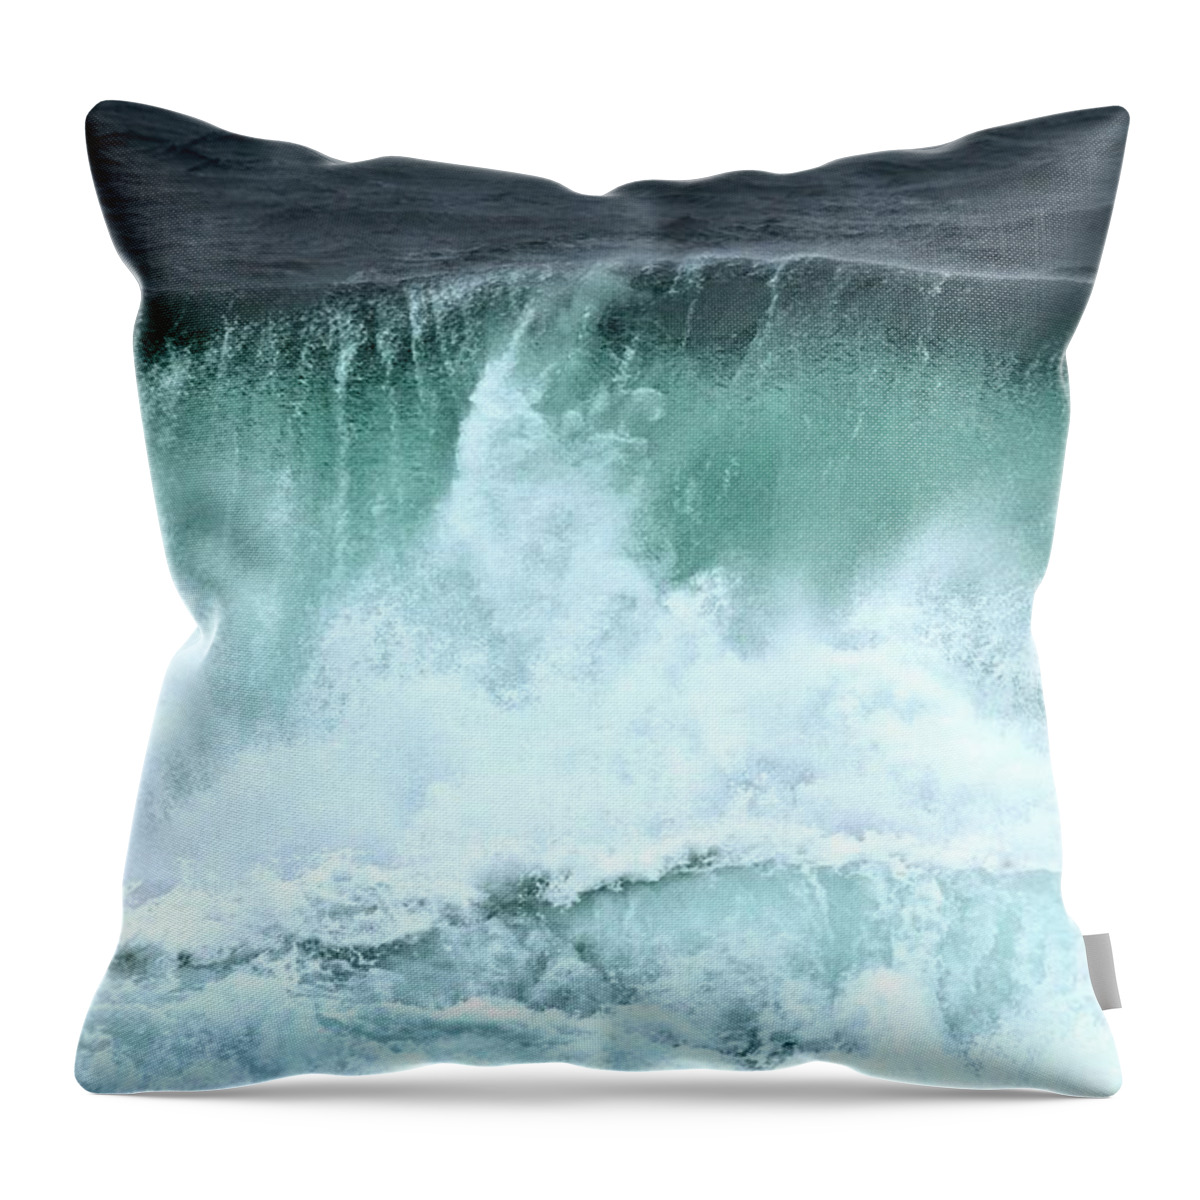 Crashing Waves Throw Pillow featuring the photograph Pacific Ocean Wave Curl by Adam Jewell